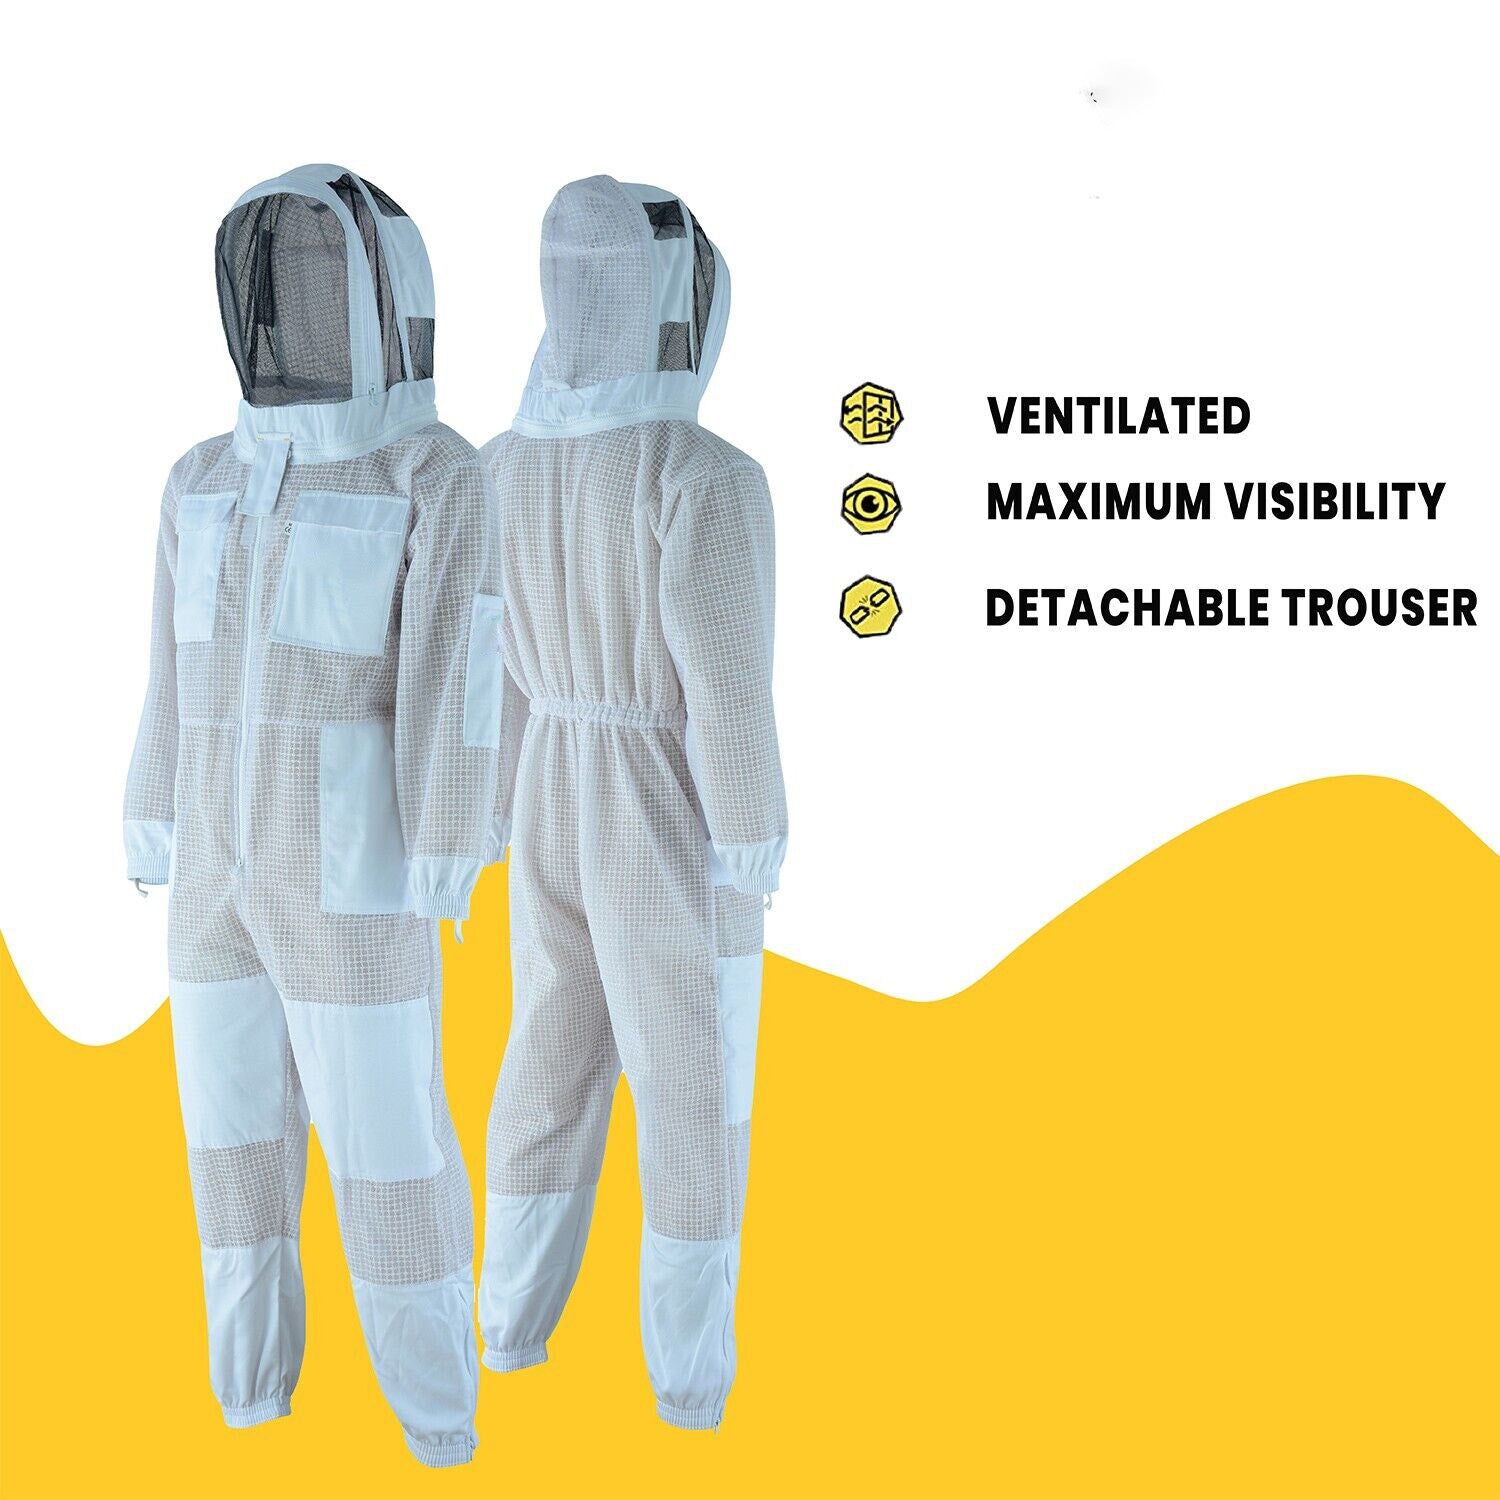 Buzz-O-Meter: Bee Protection Suit for Hive [BUY NOW]